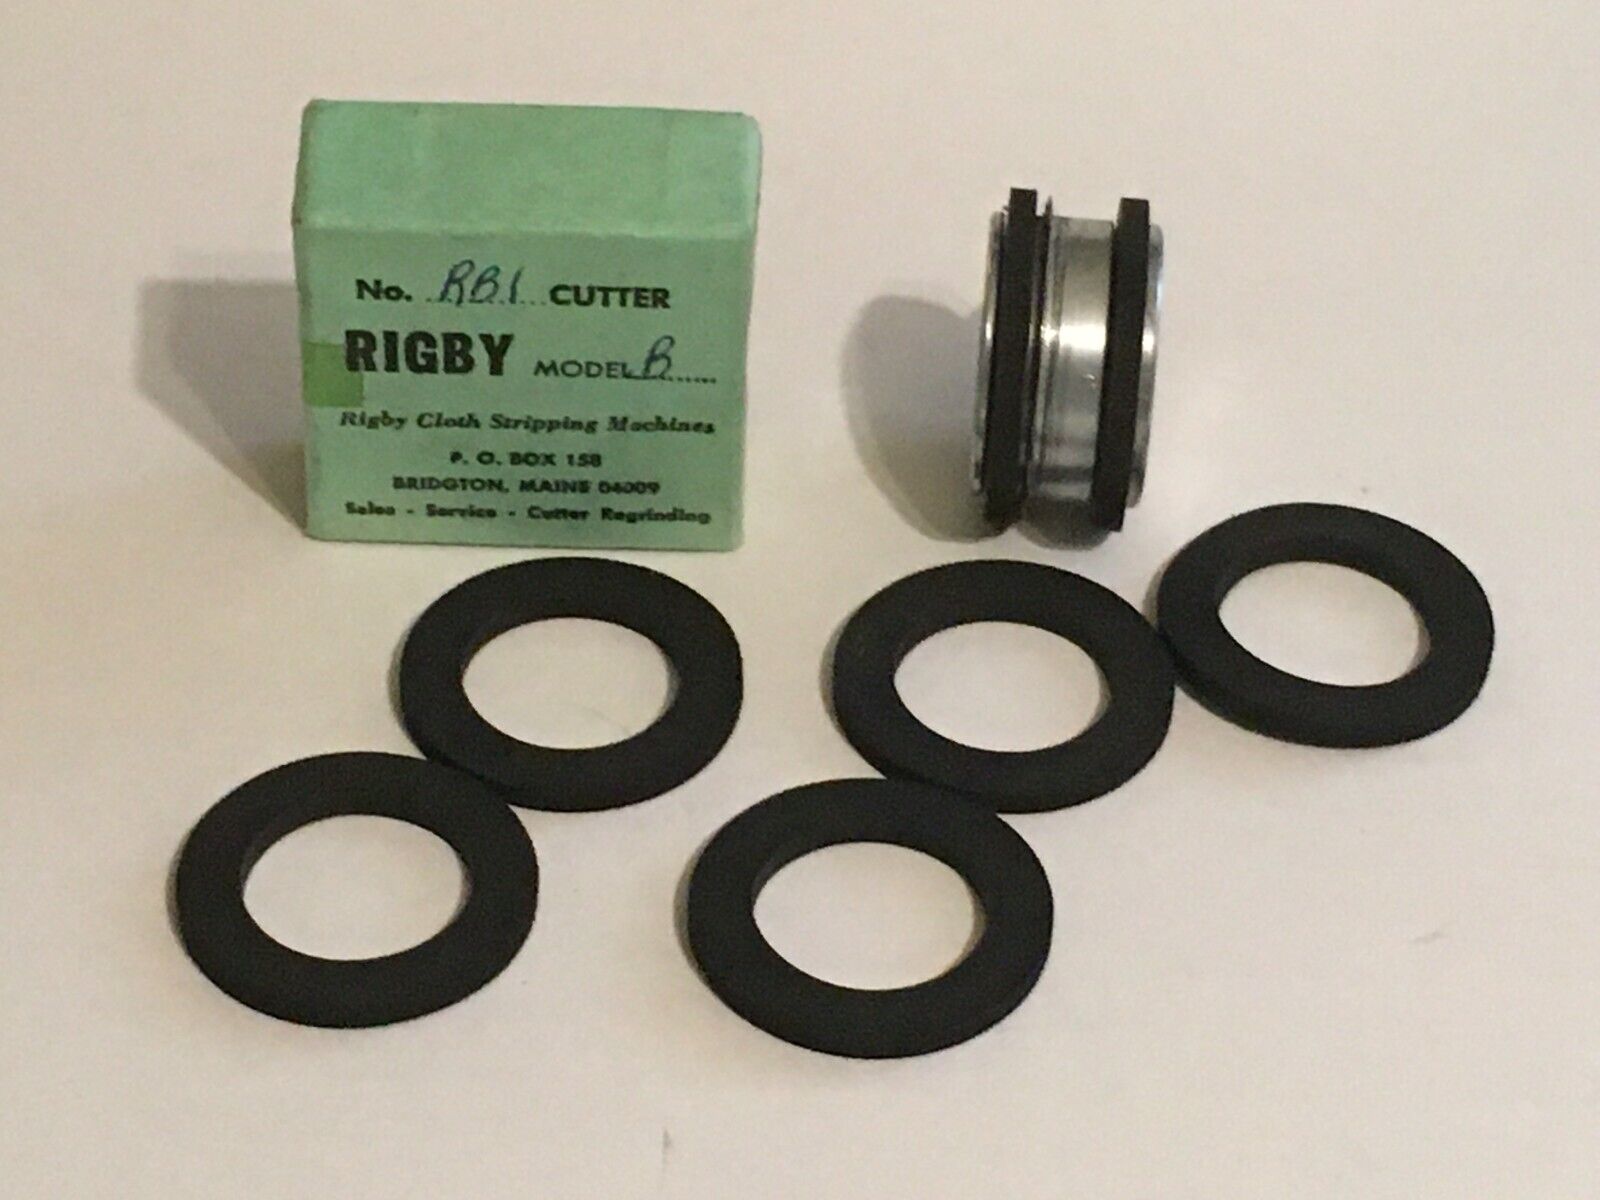 Rigby Cutting Machine Blade (rb1) For Model B + 5 Extra Washers